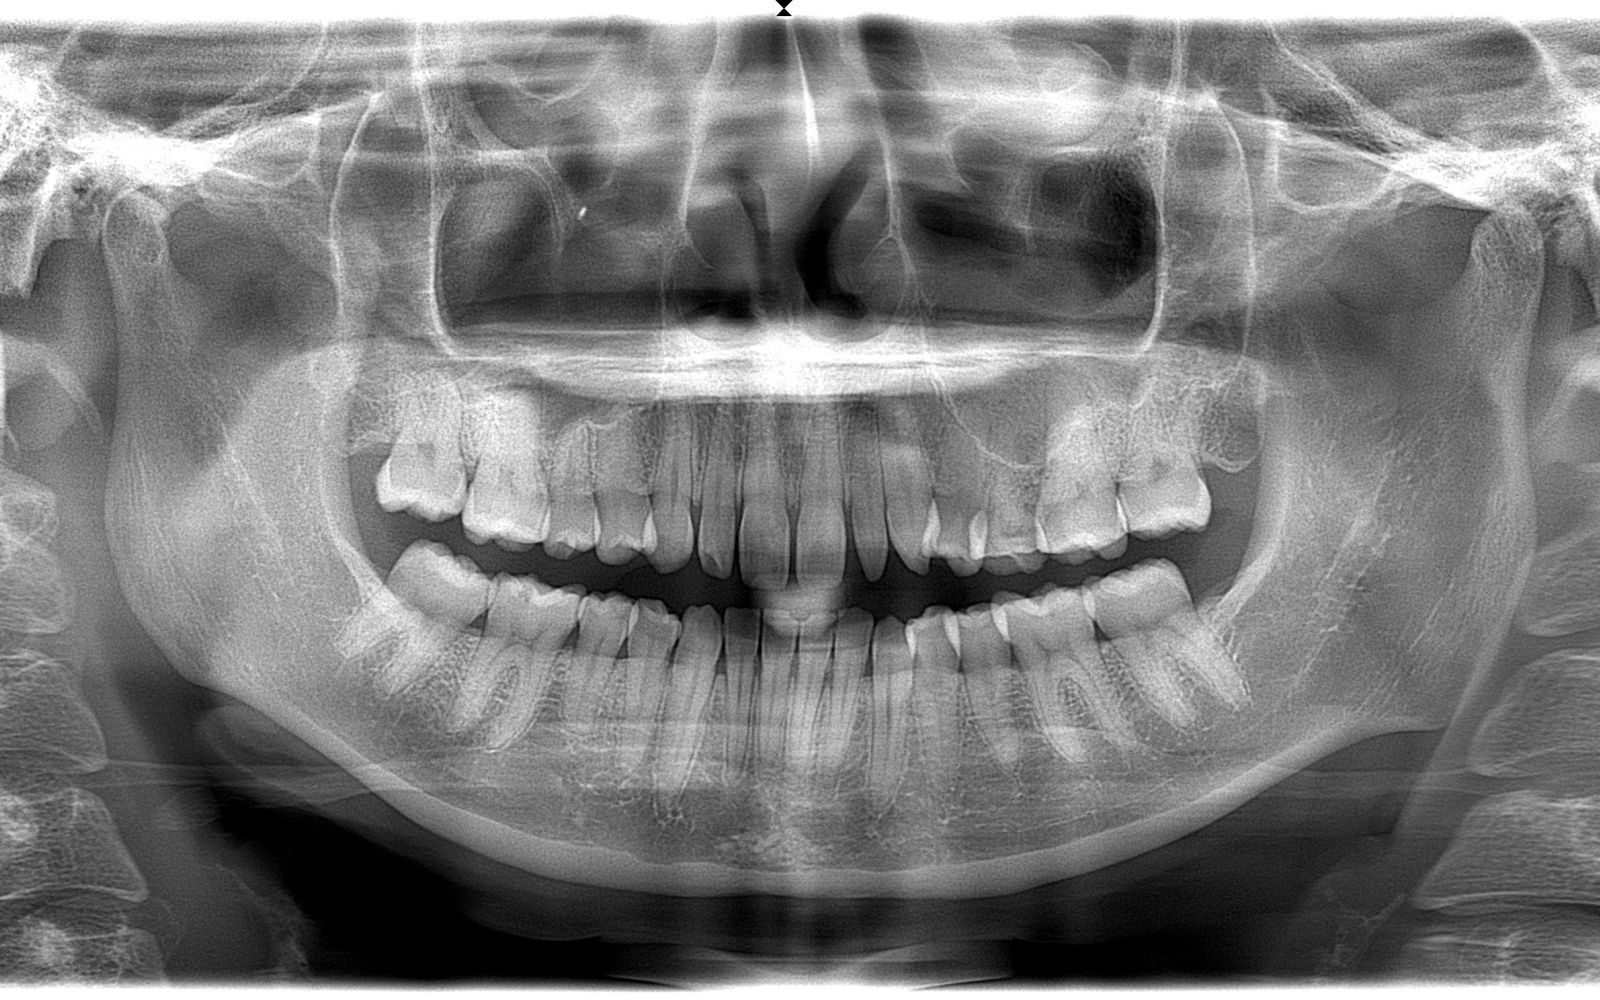 Peg Lateral Incisors shown on X-Ray Scan